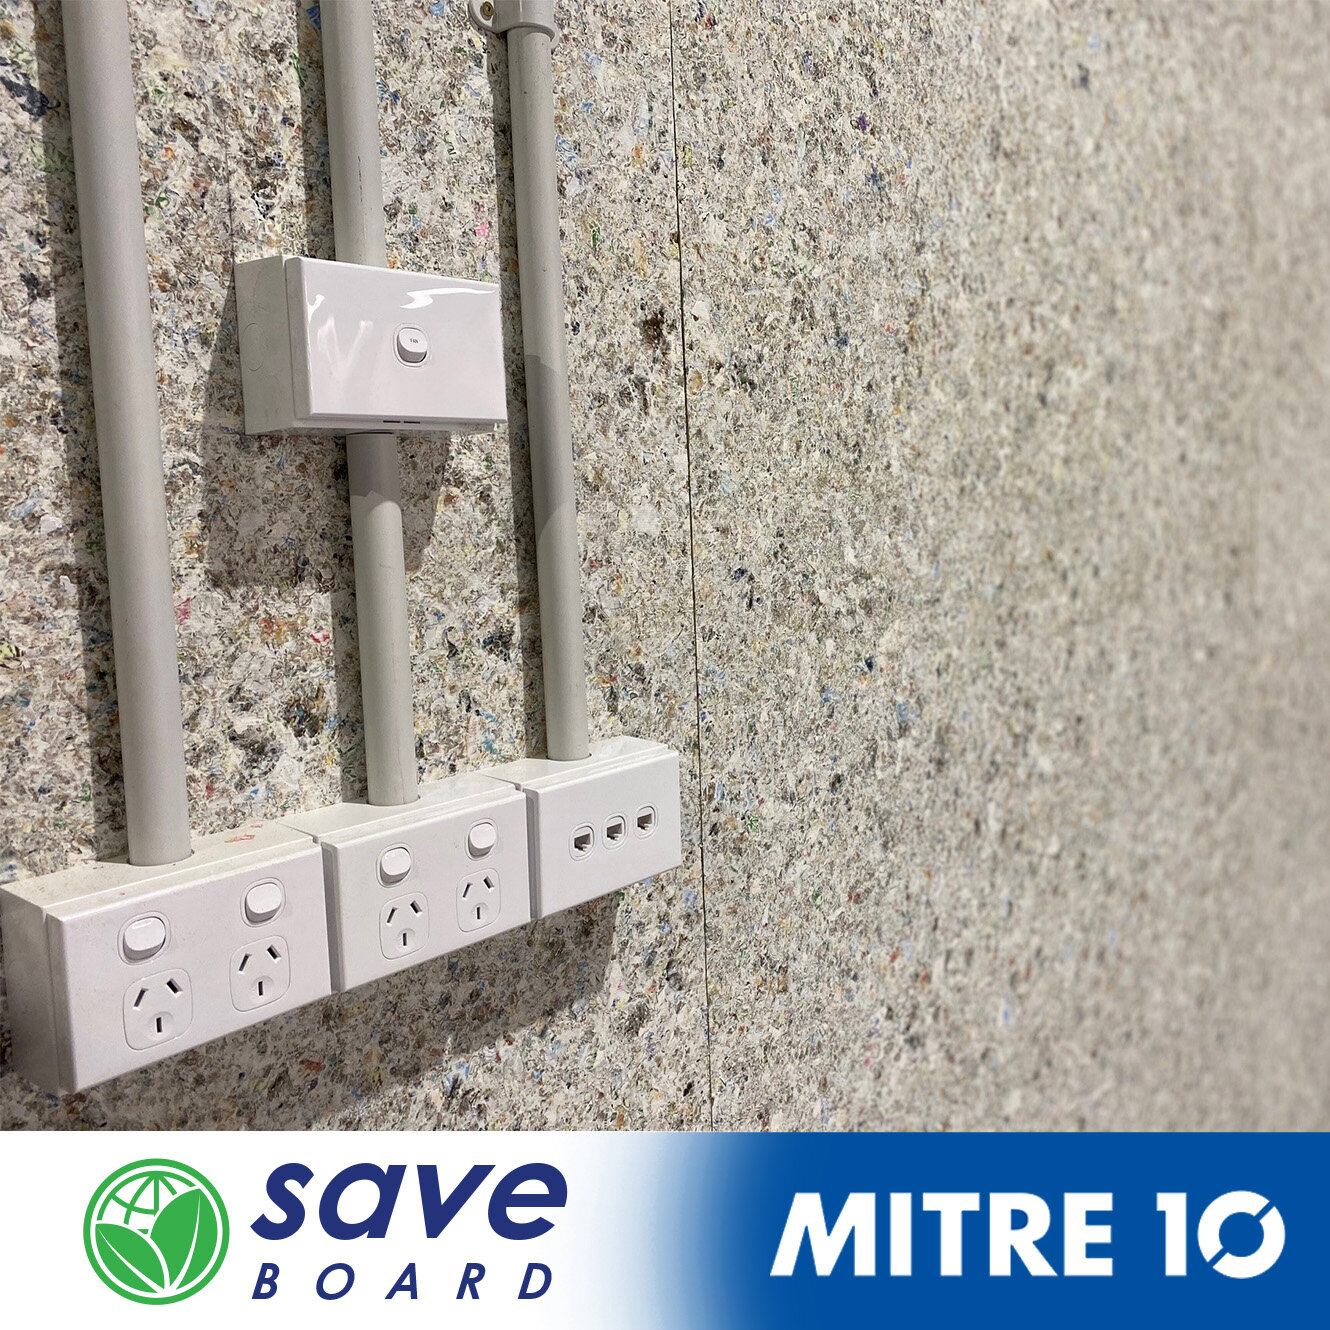 Need garage lining, wall sheets, or temporary fencing and hoardings?
saveBOARD has you covered! Now available for you to browse on the Mitre 10 website, so get online and check out the whole range today.

 #mccormacksaustralia #beautifulfunctionalsus